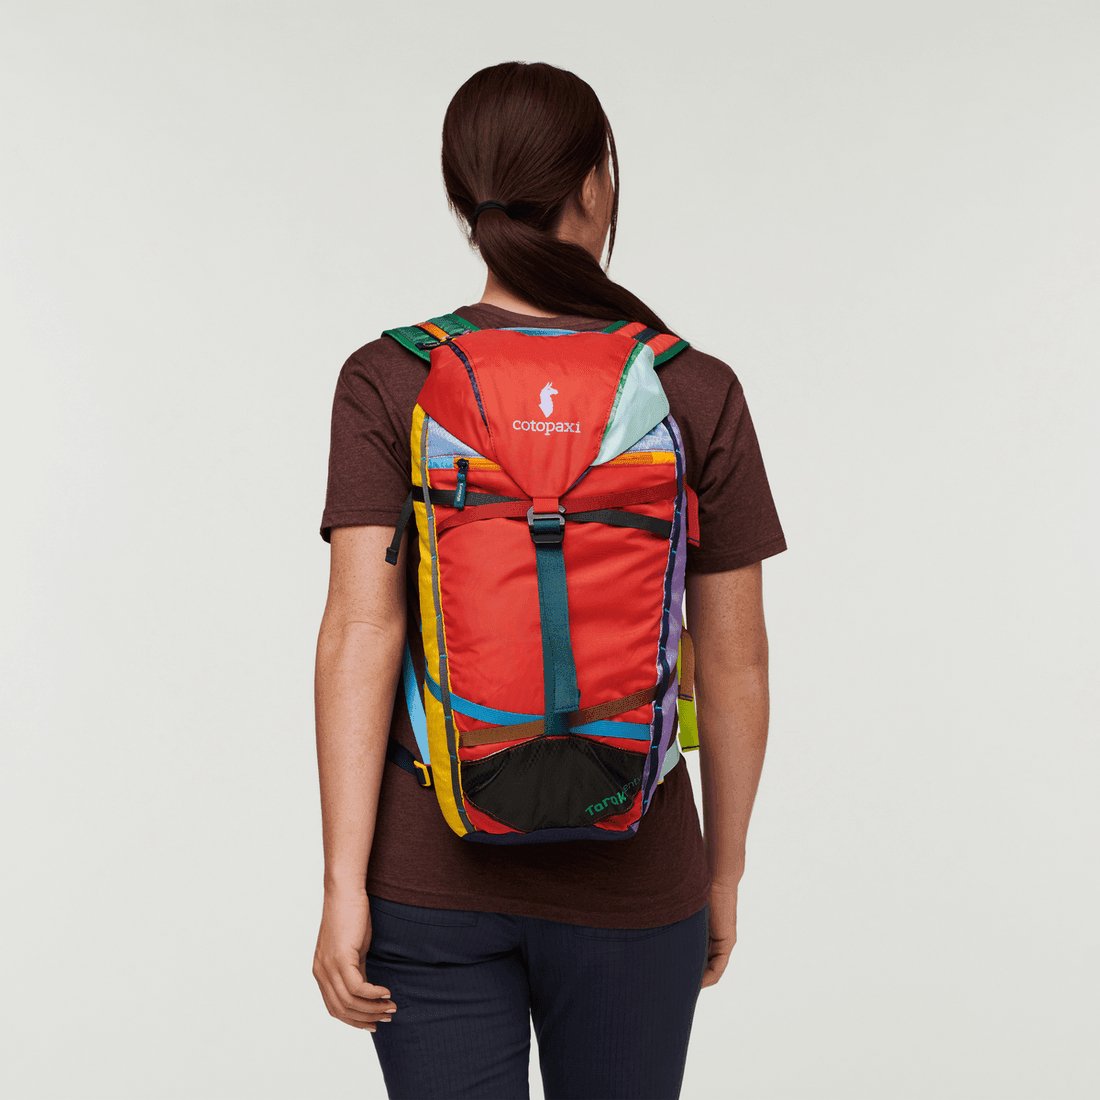 Tarak 20L Backpack - The Shoe CollectiveCotopaxi